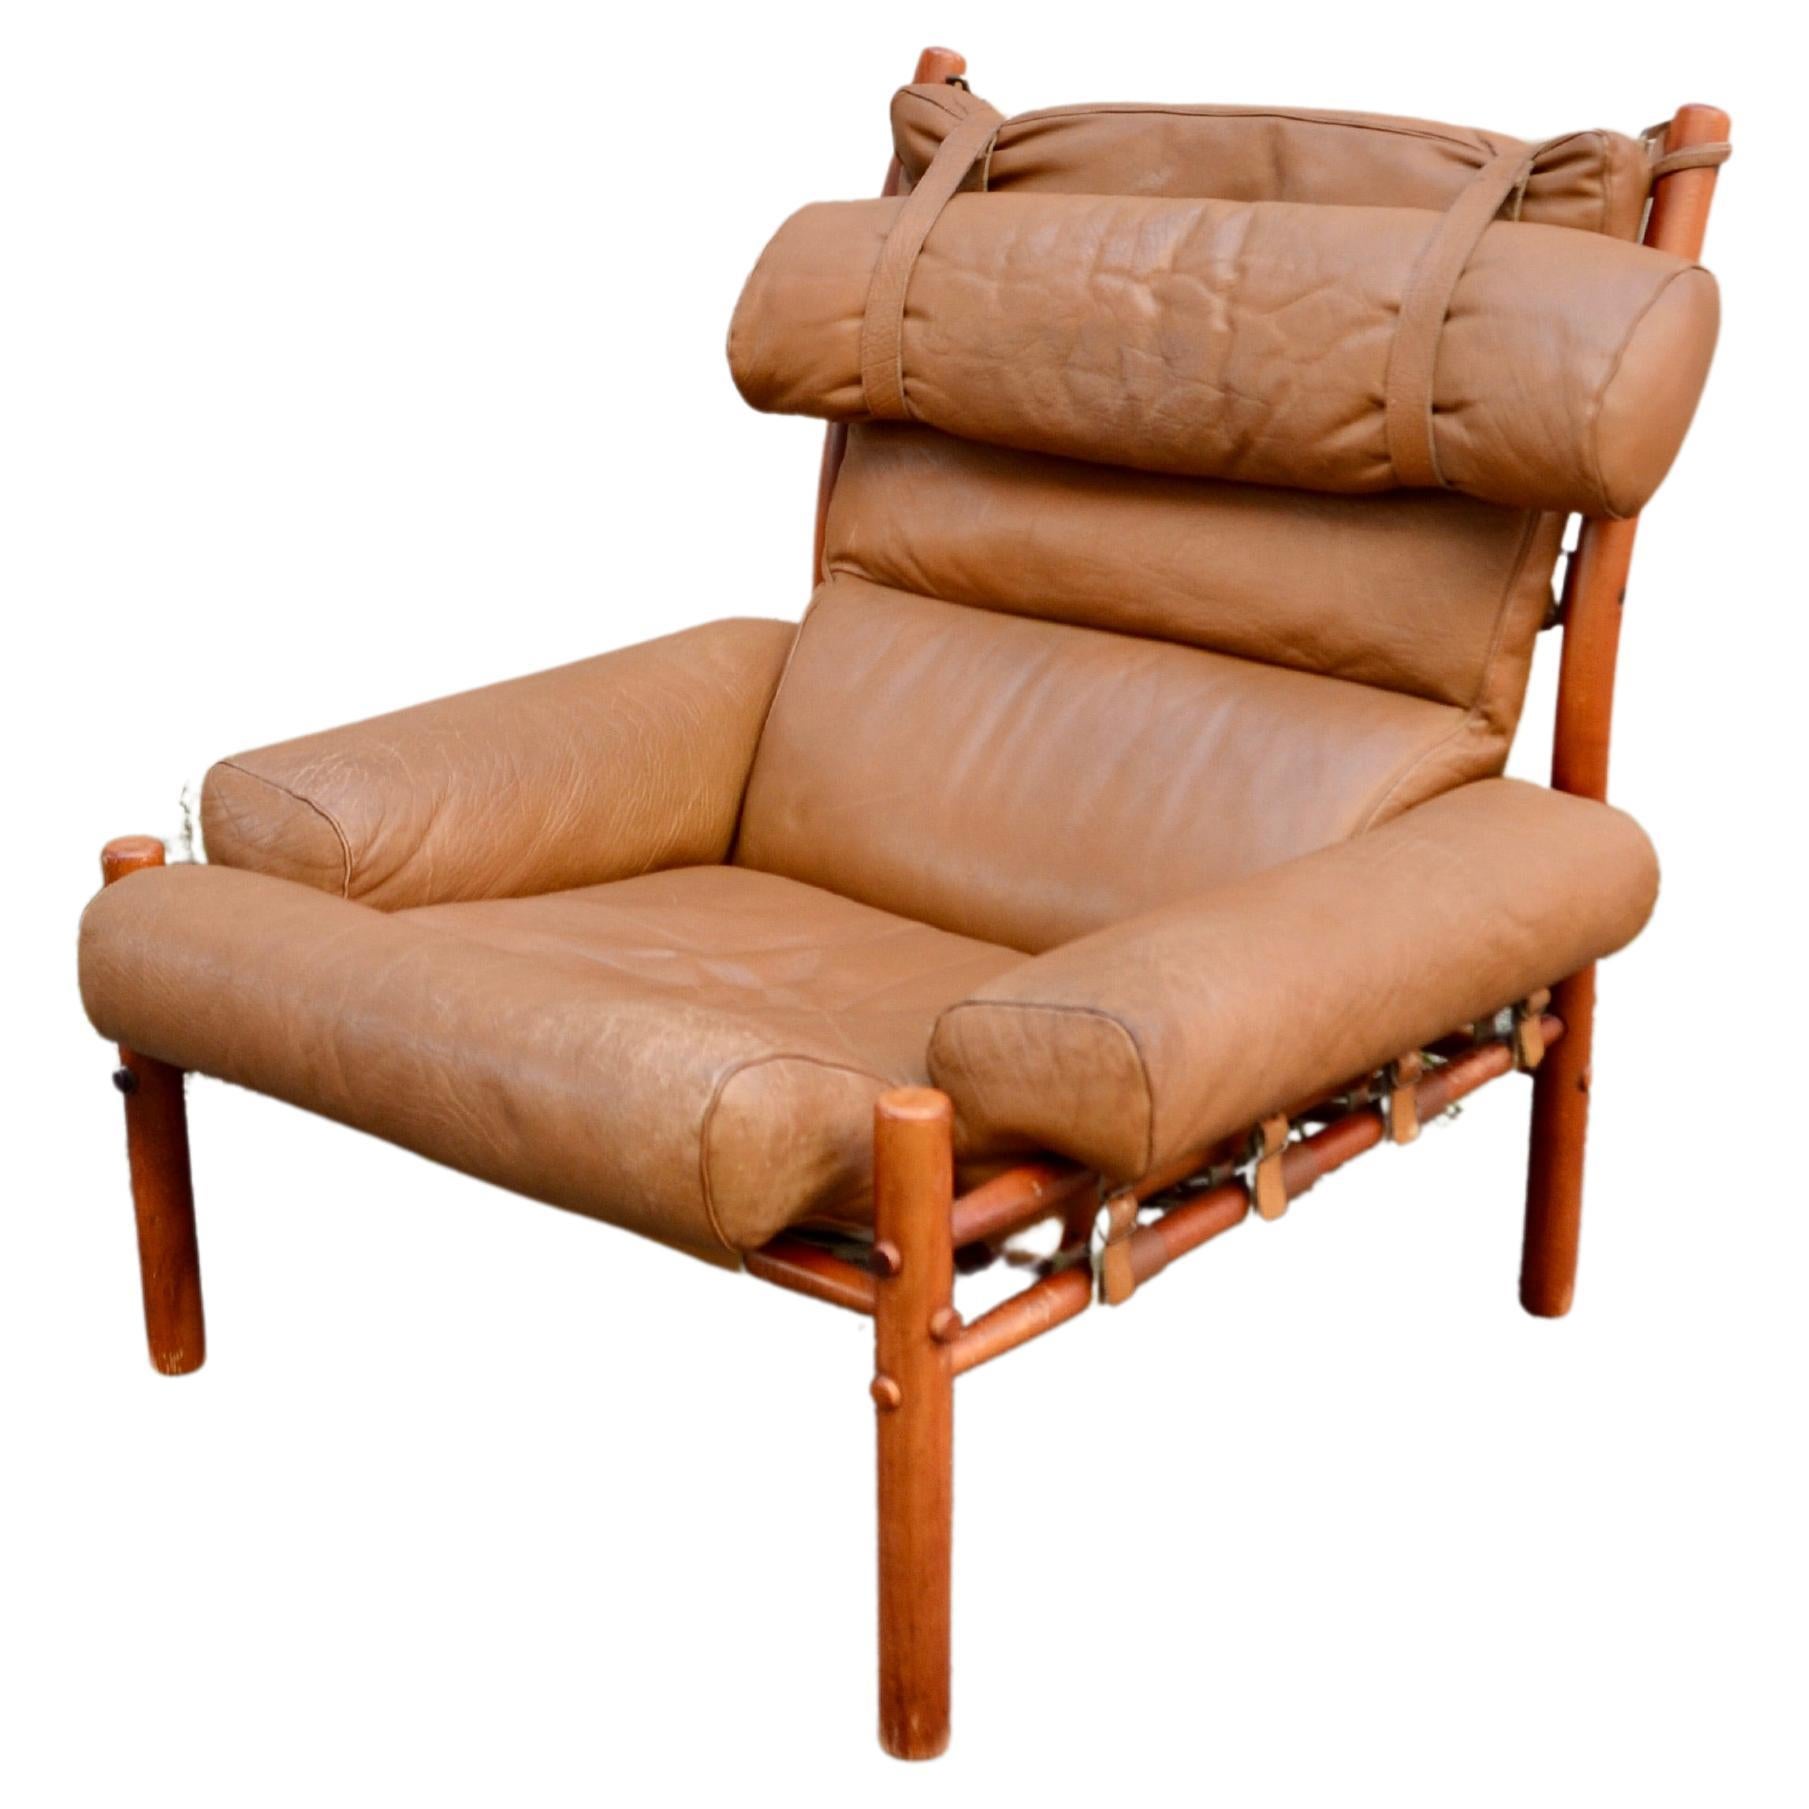 Arne Norell Model Inca Caramel Leather Lounge Chair For Sale